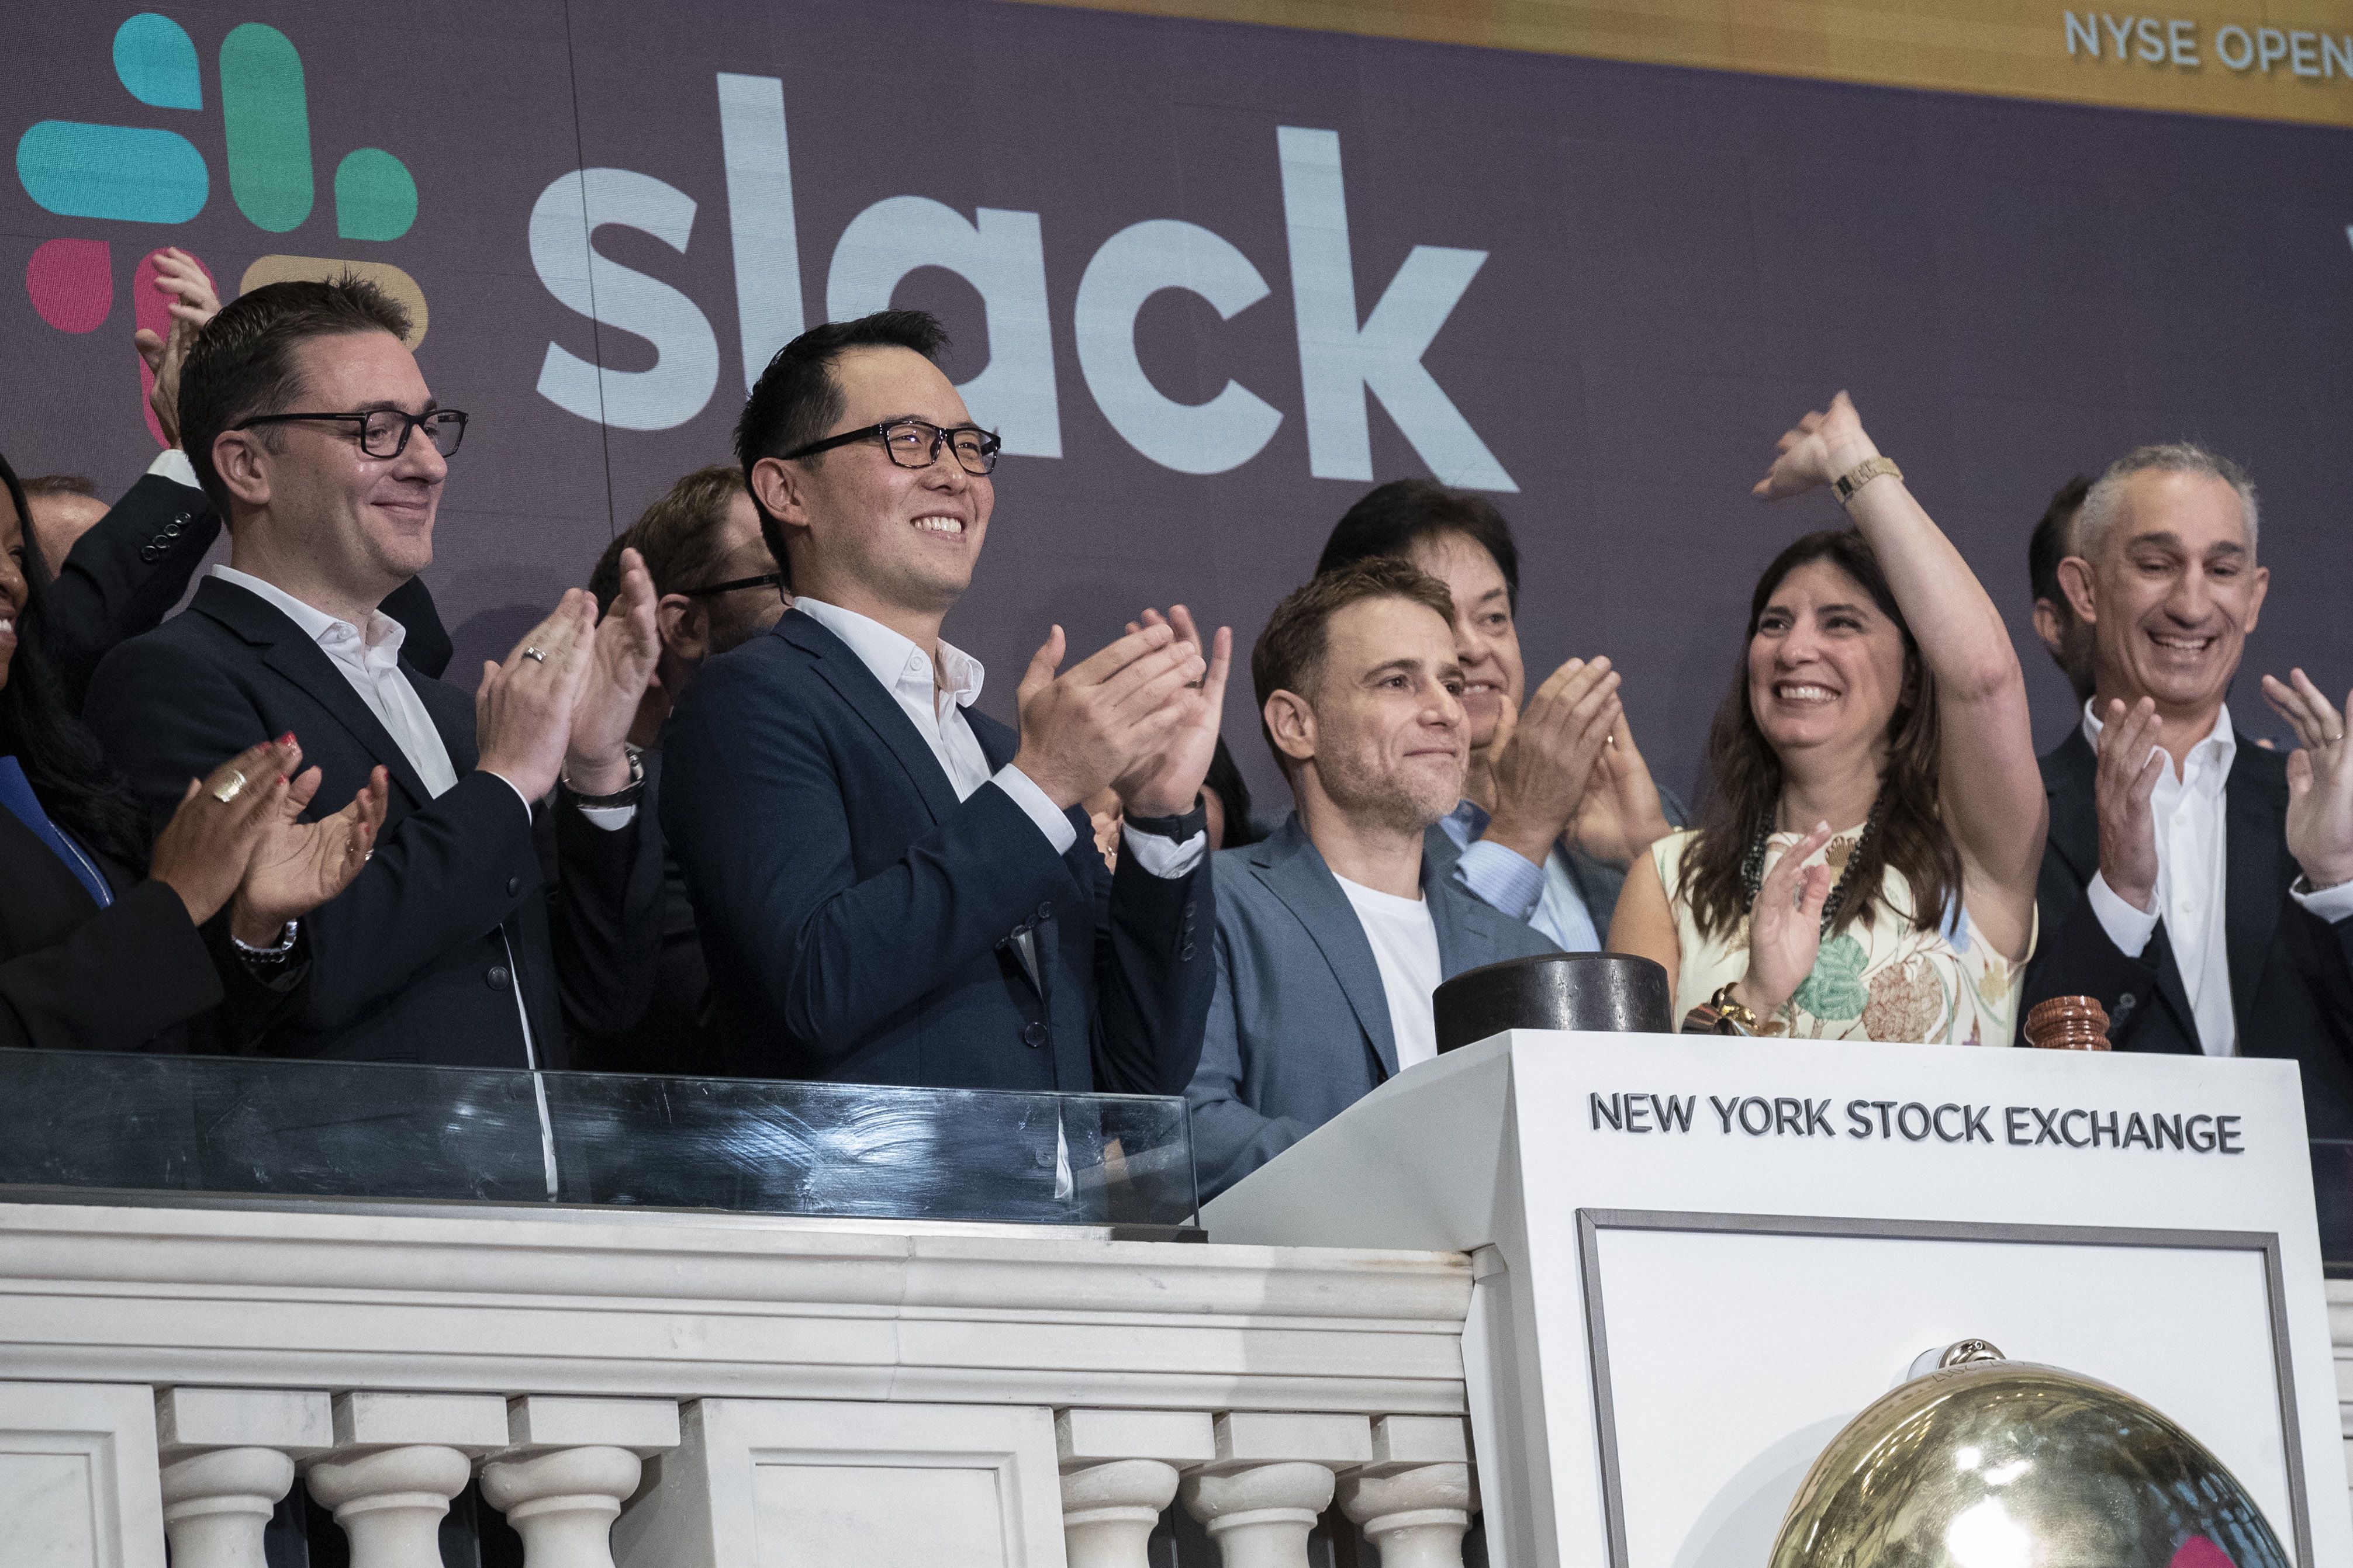 Putting Roblox's incredible $45 billion IPO in context